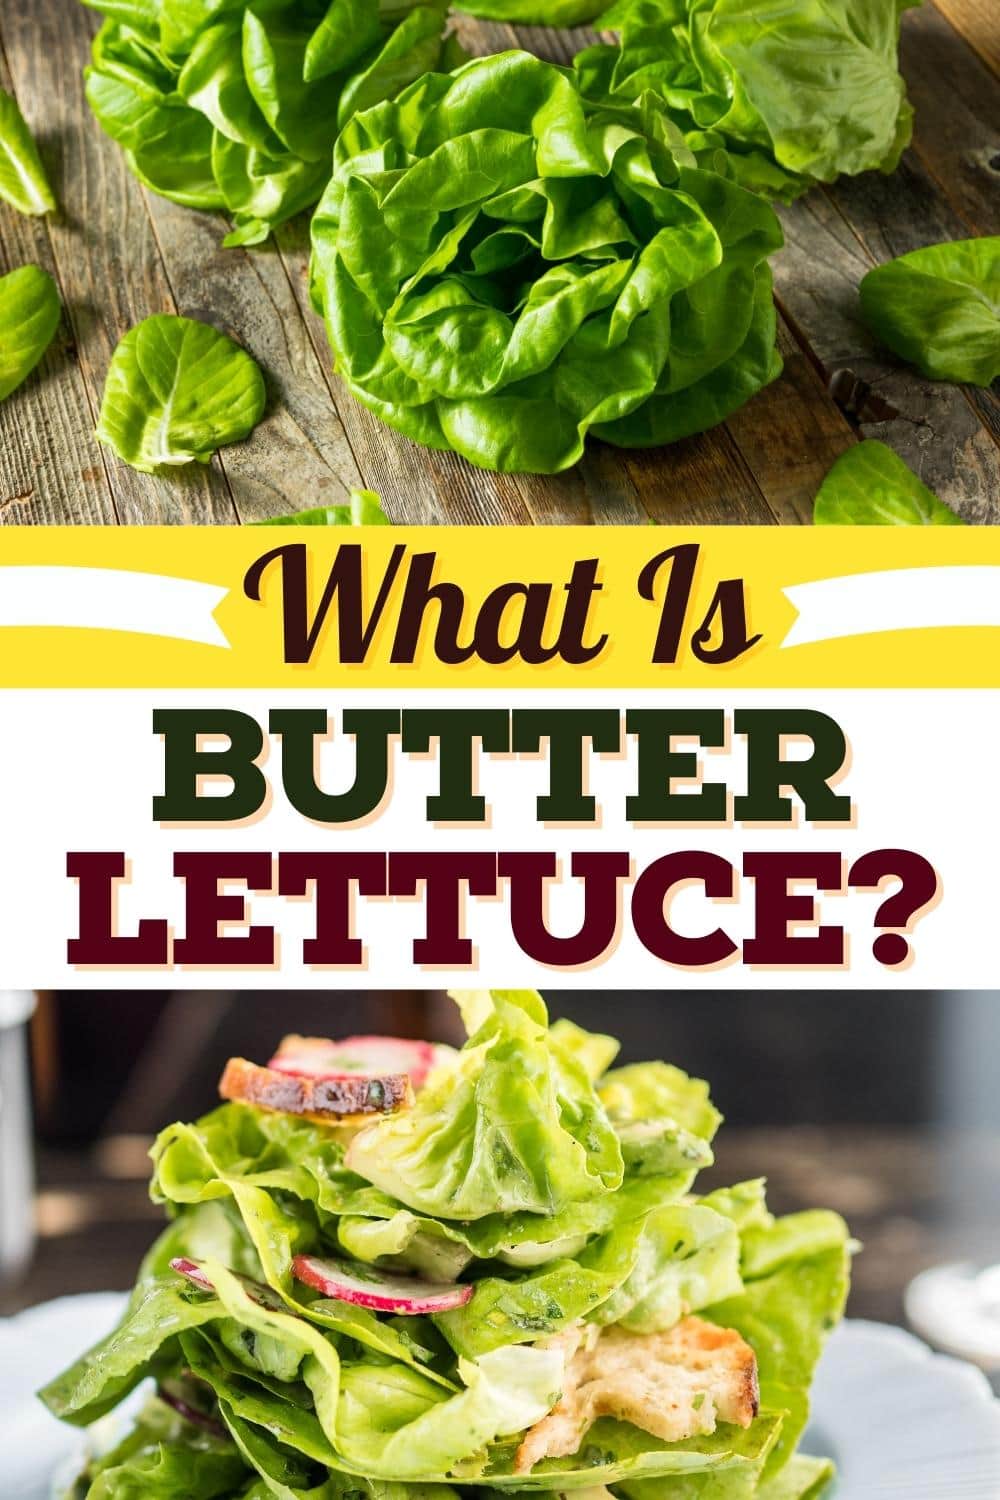 What Is Butter Lettuce?